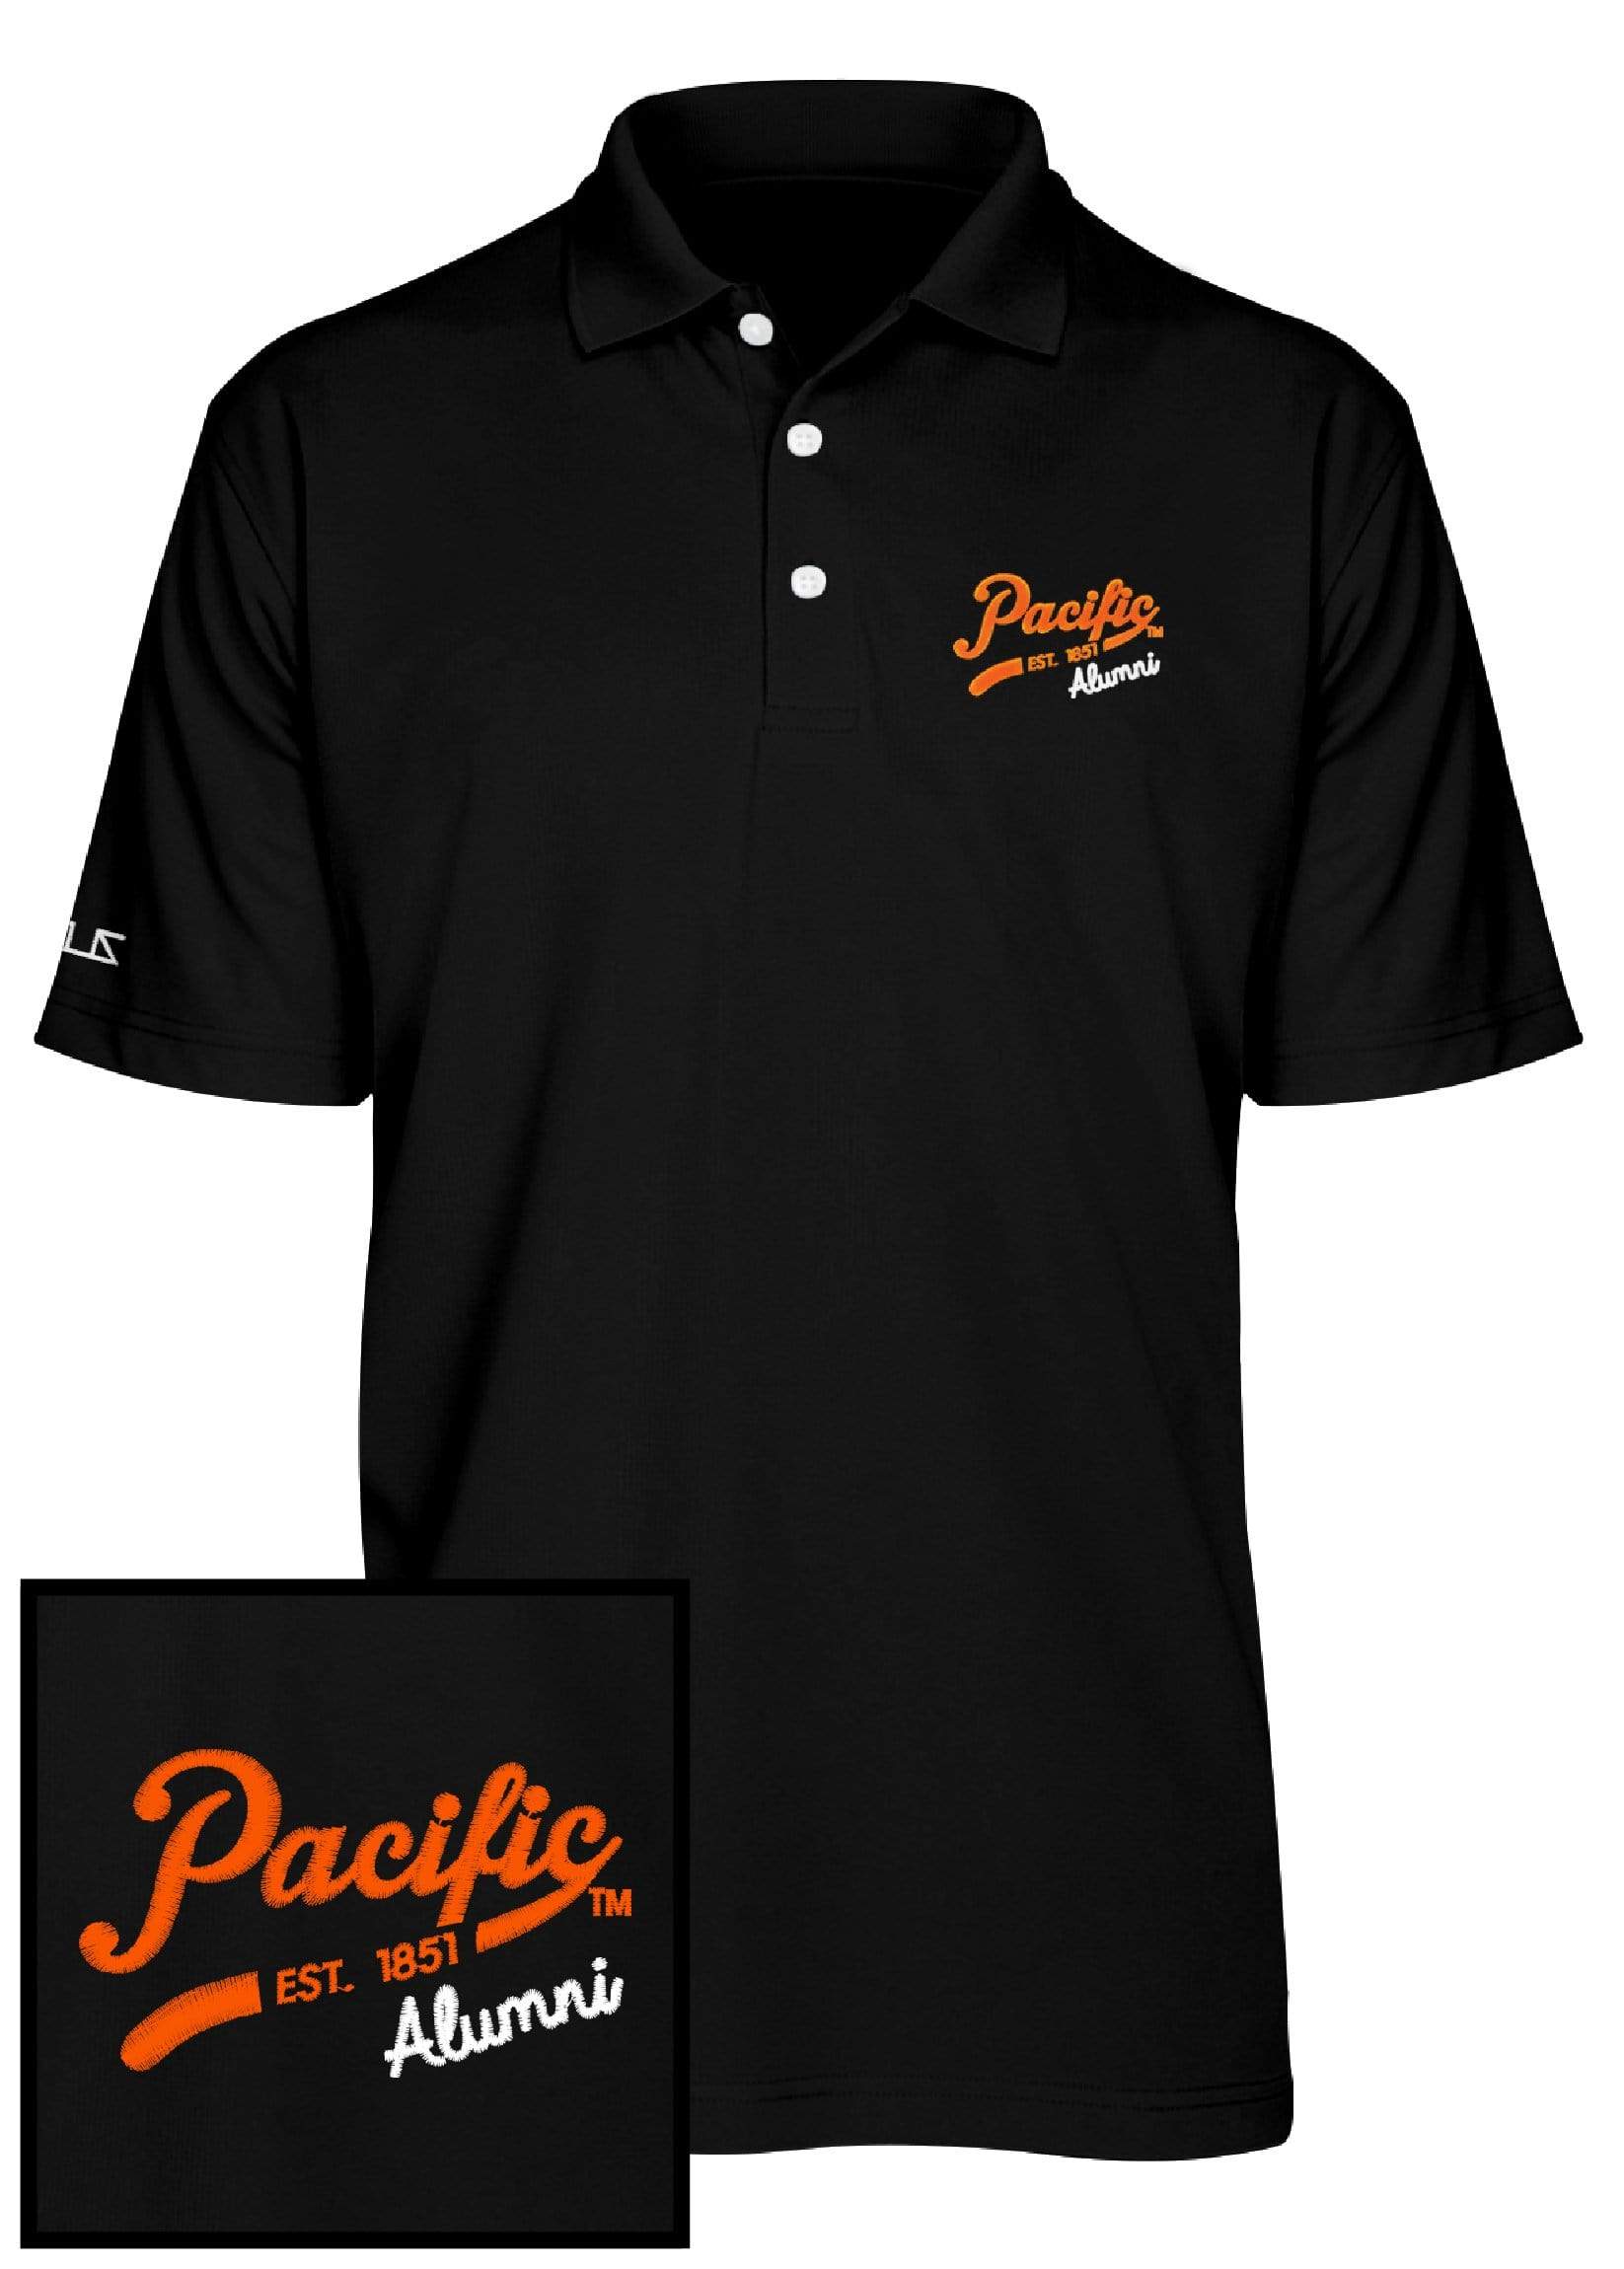 University of the Pacific Tigers Pacific Alumni Spirit Performance Polo Shirt by Zeus Collegiate